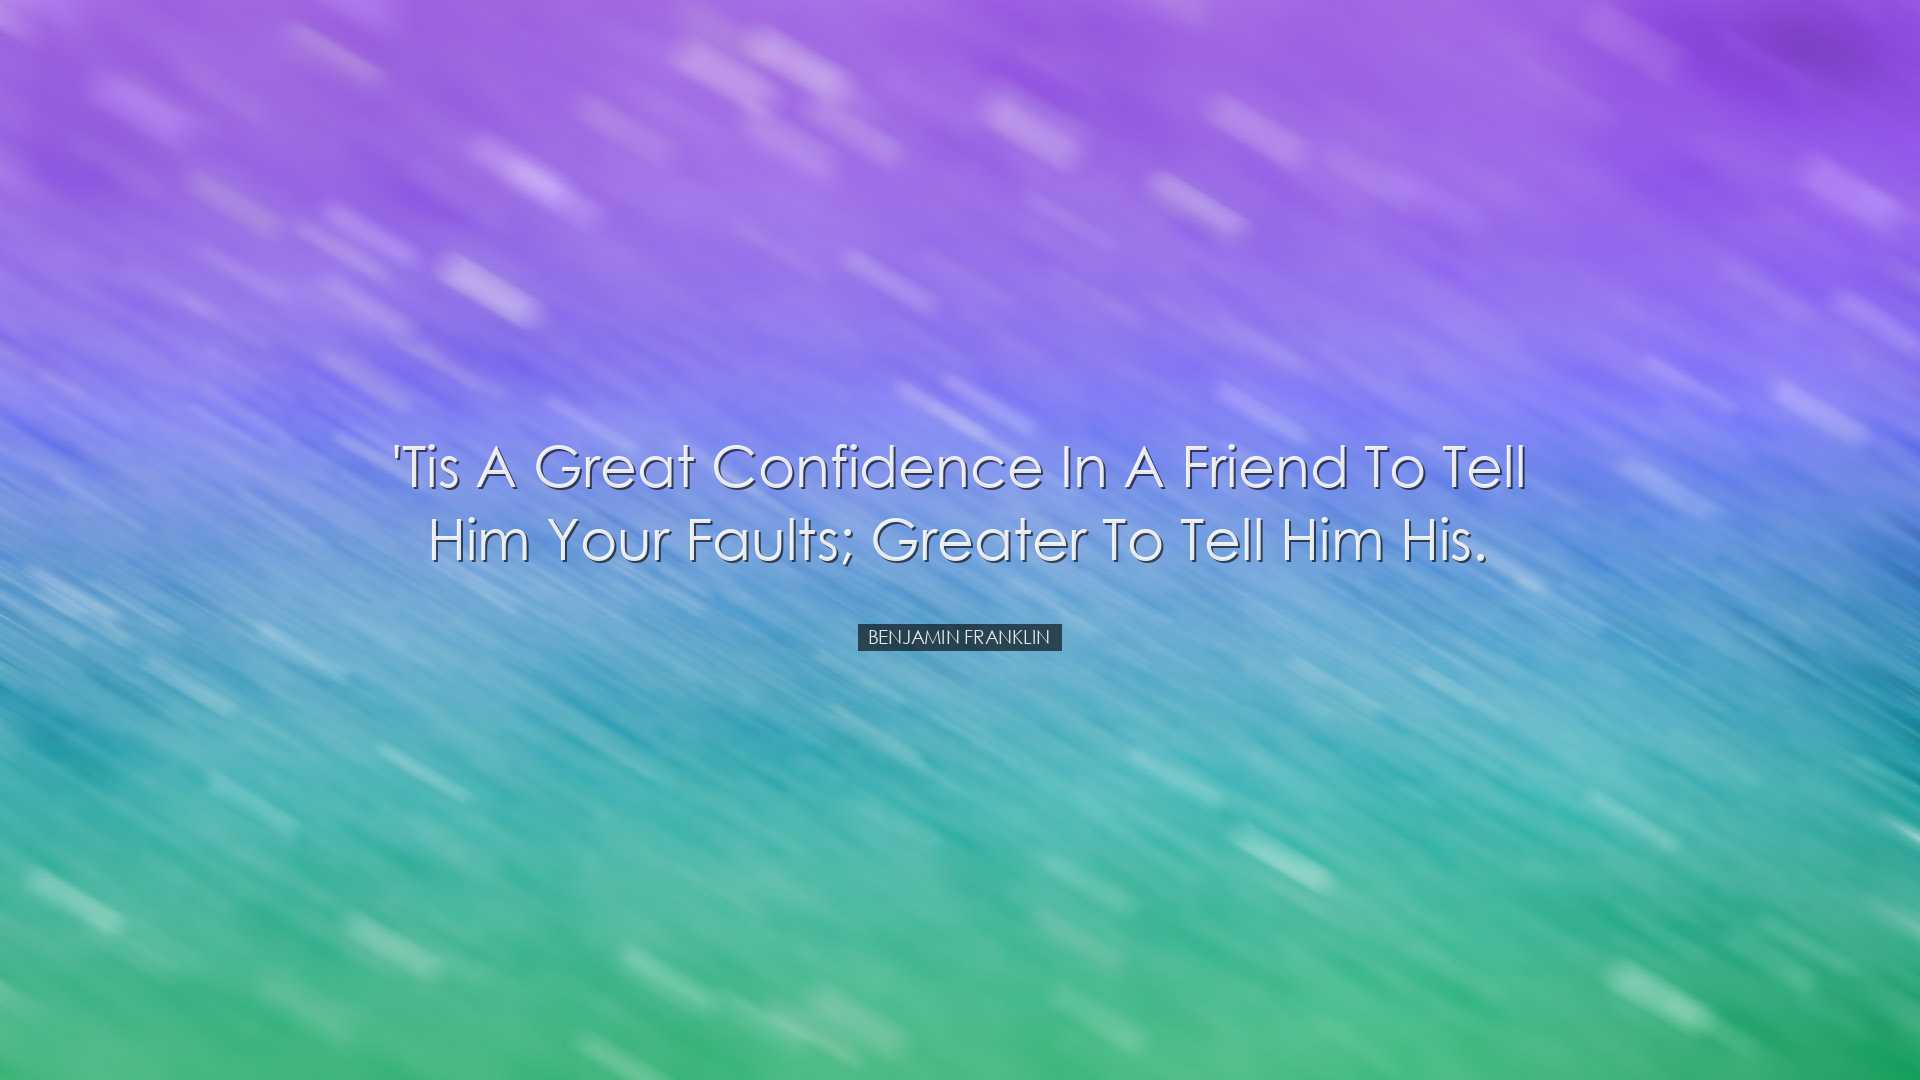 'Tis a great confidence in a friend to tell him your faults; great